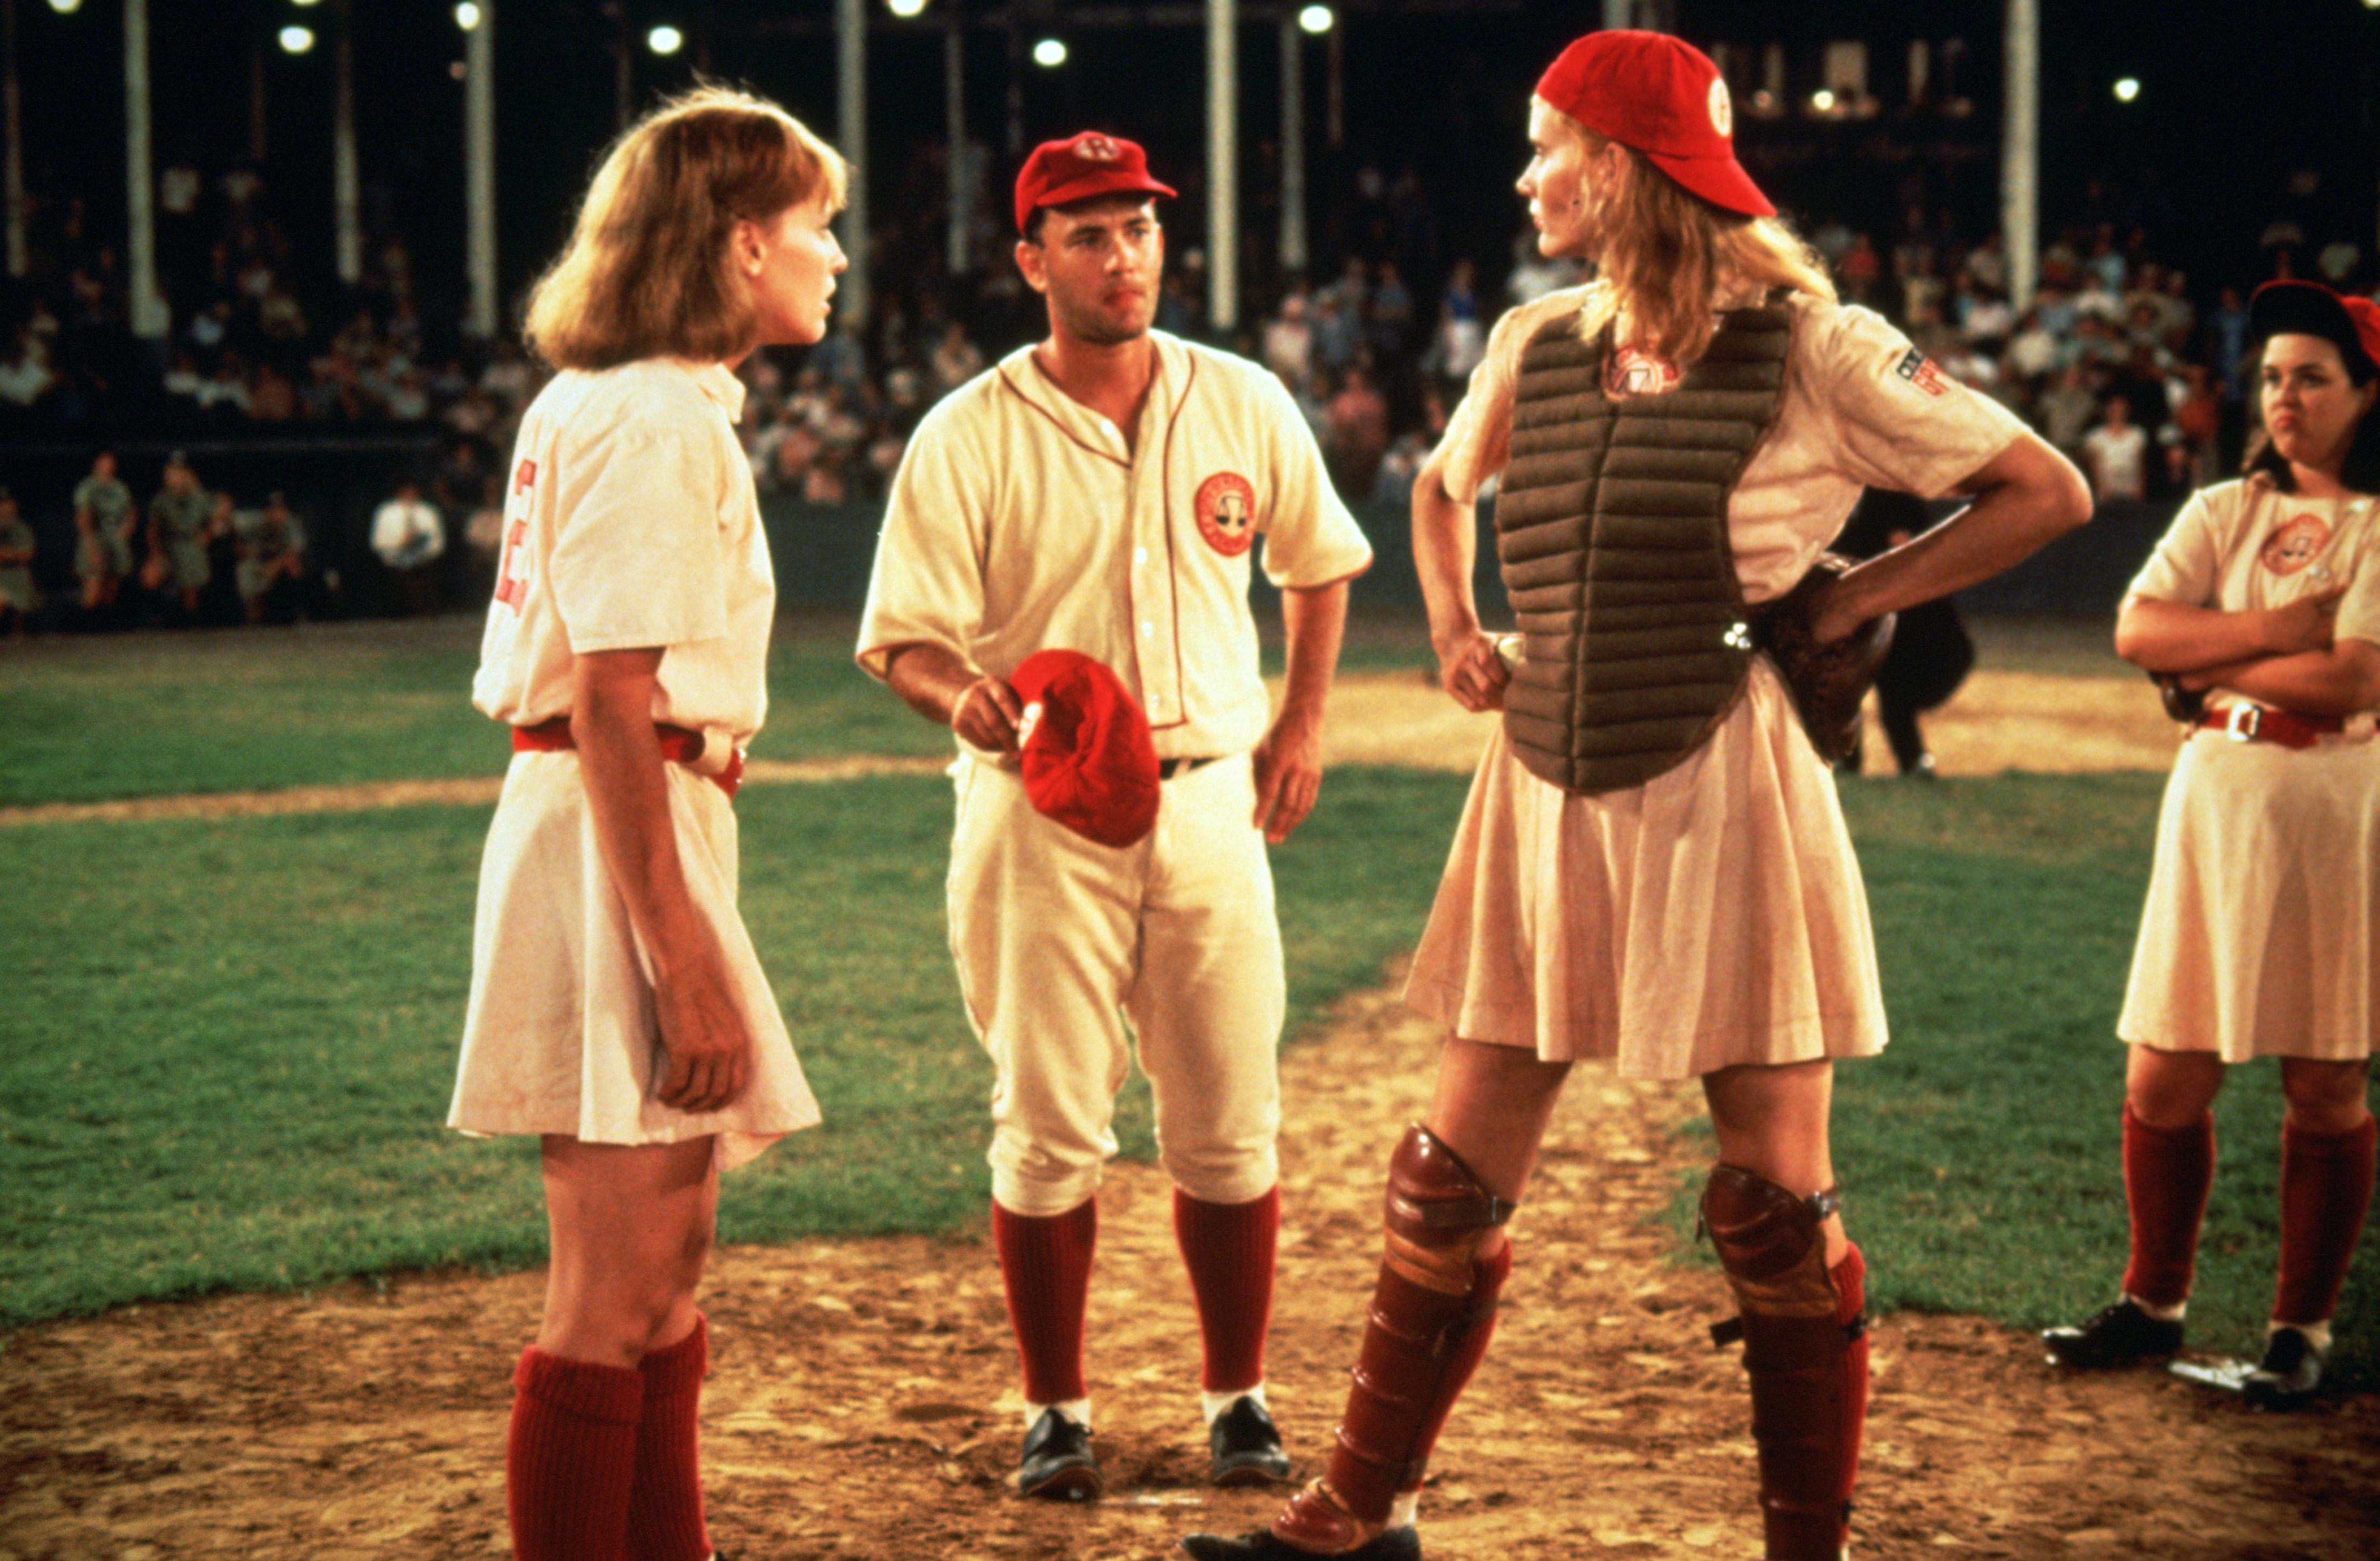 Kit and Dottie, A League of Their Own, 1992.